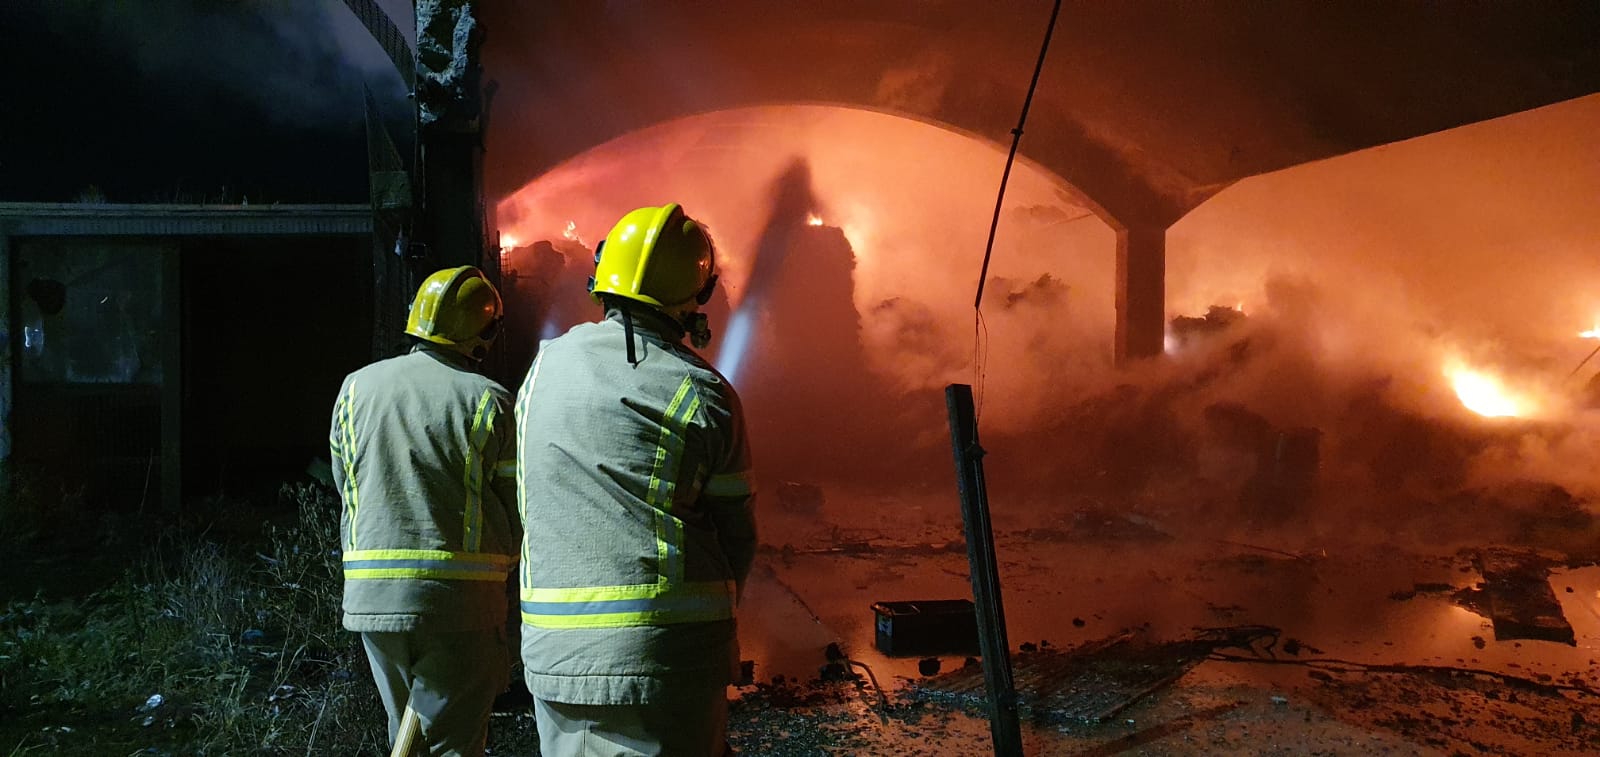 Firefighters tackle fire